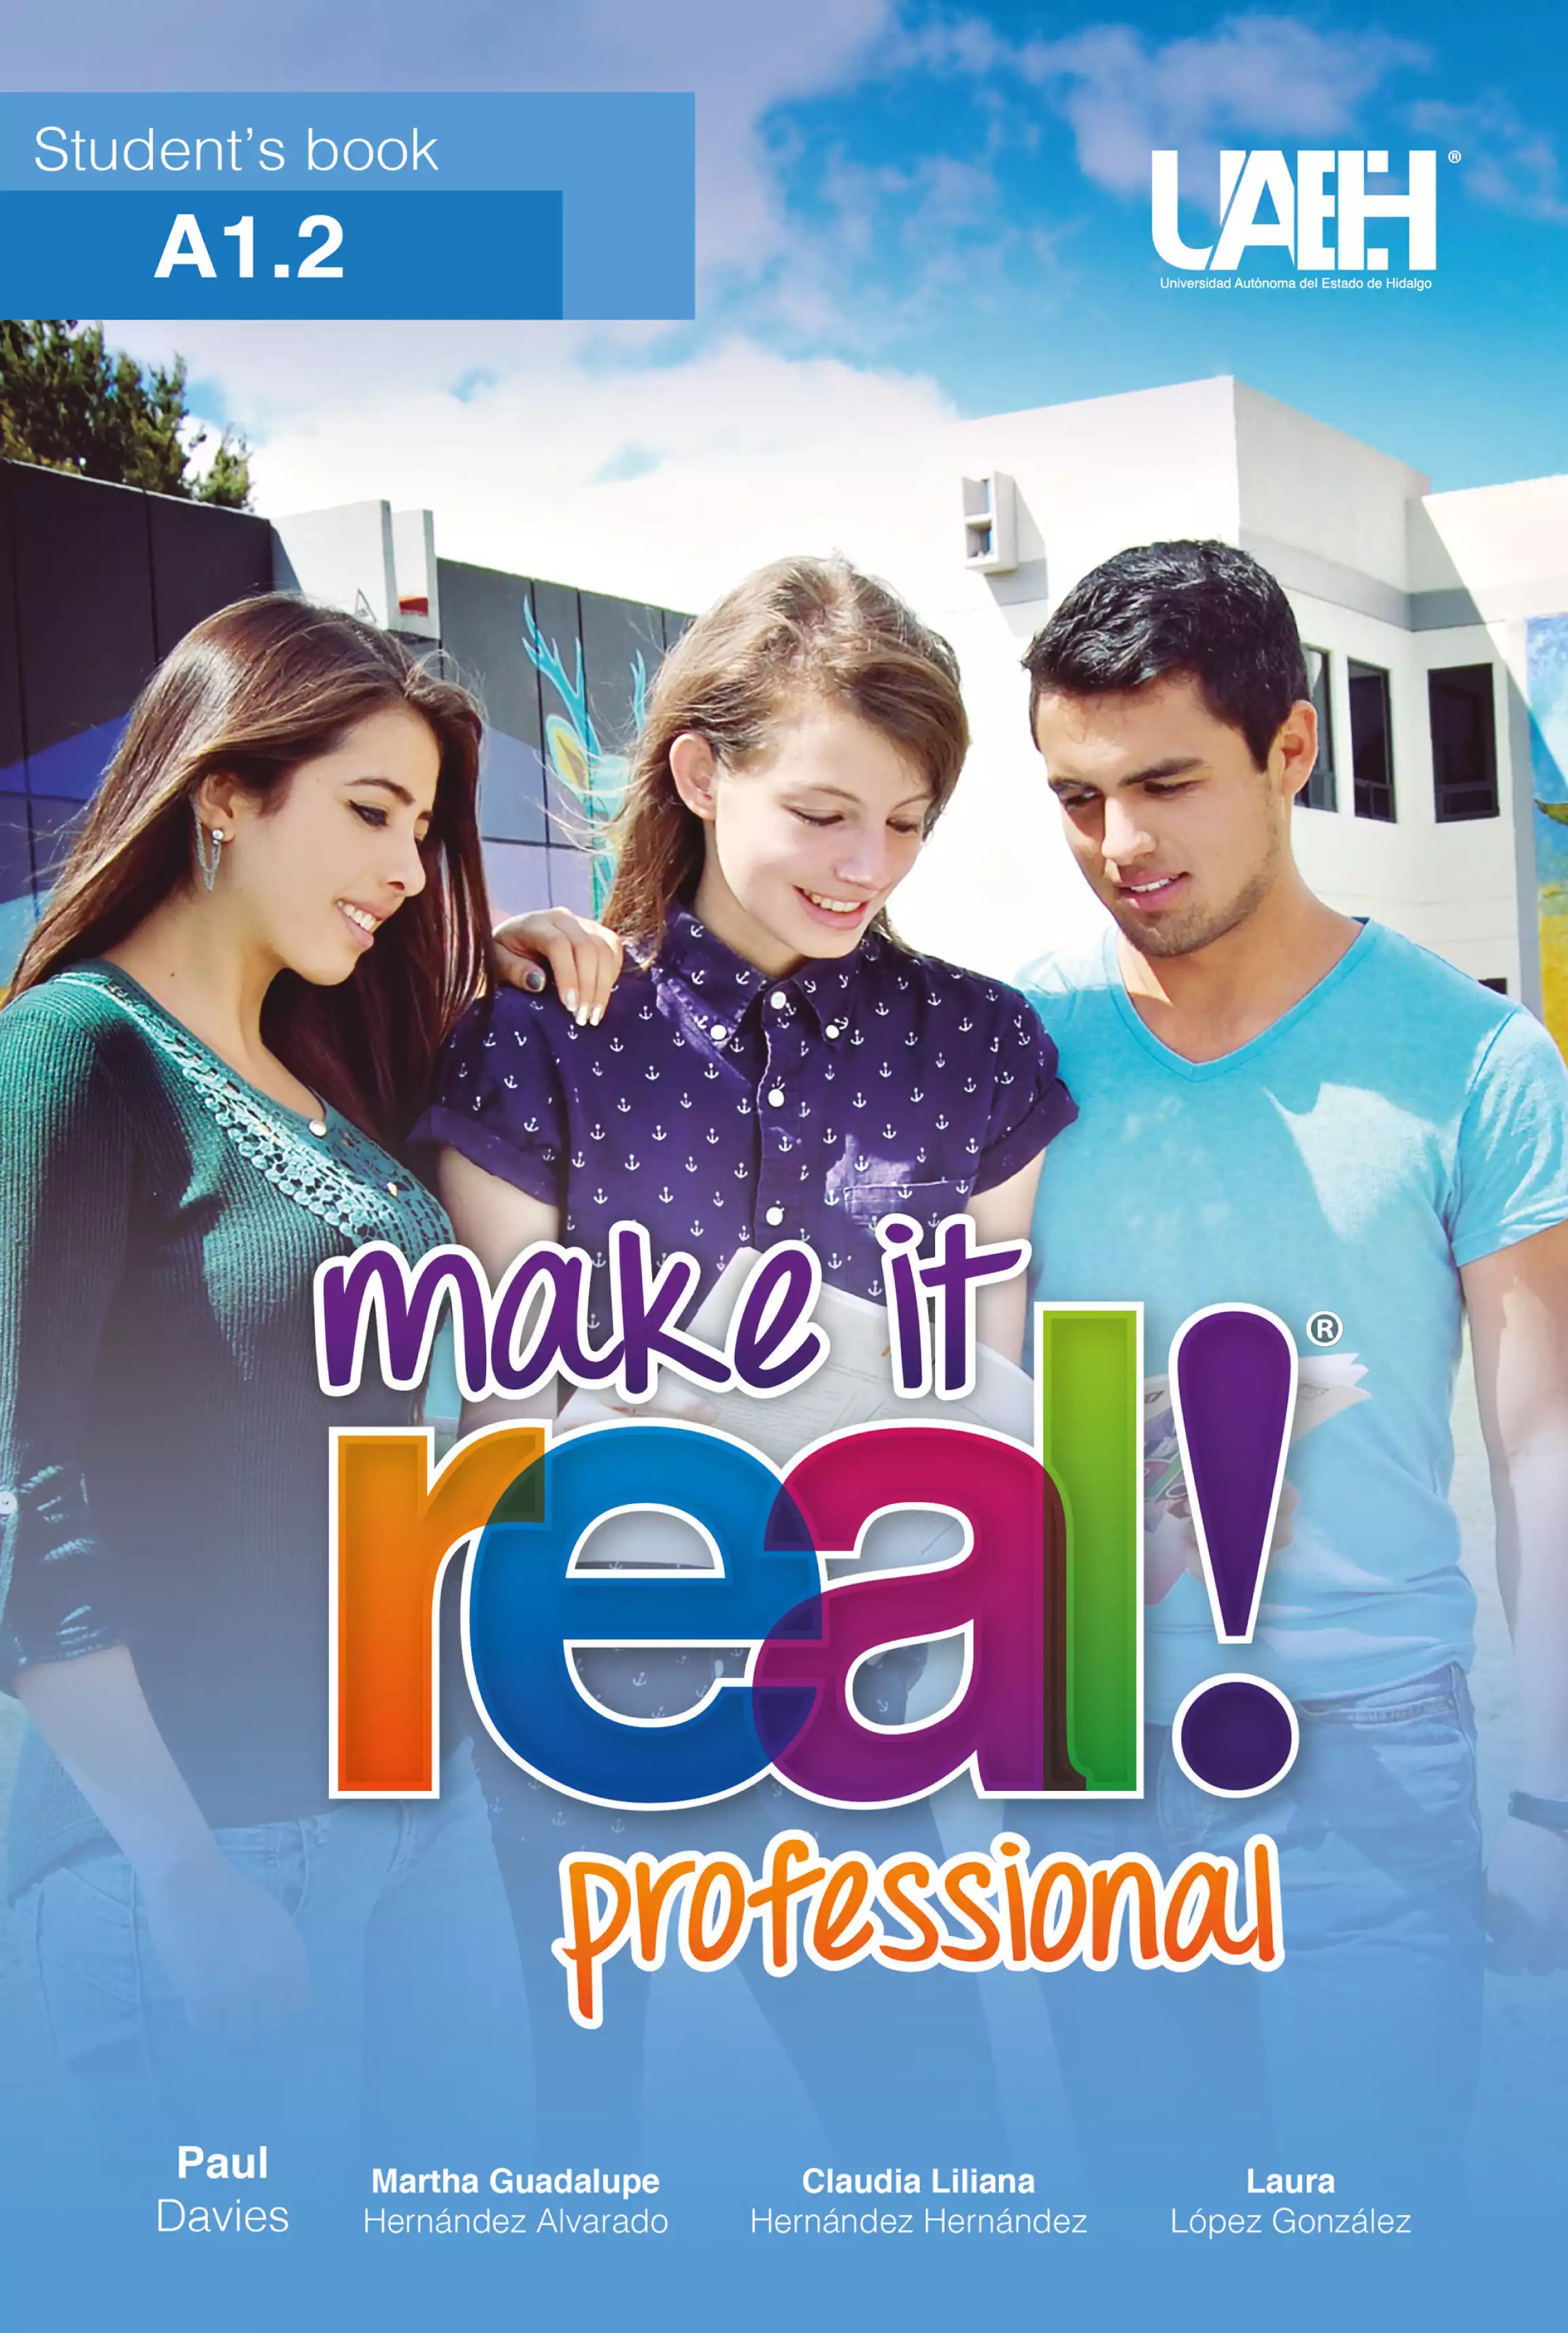 Make it real! Professional A 1.2 Students book